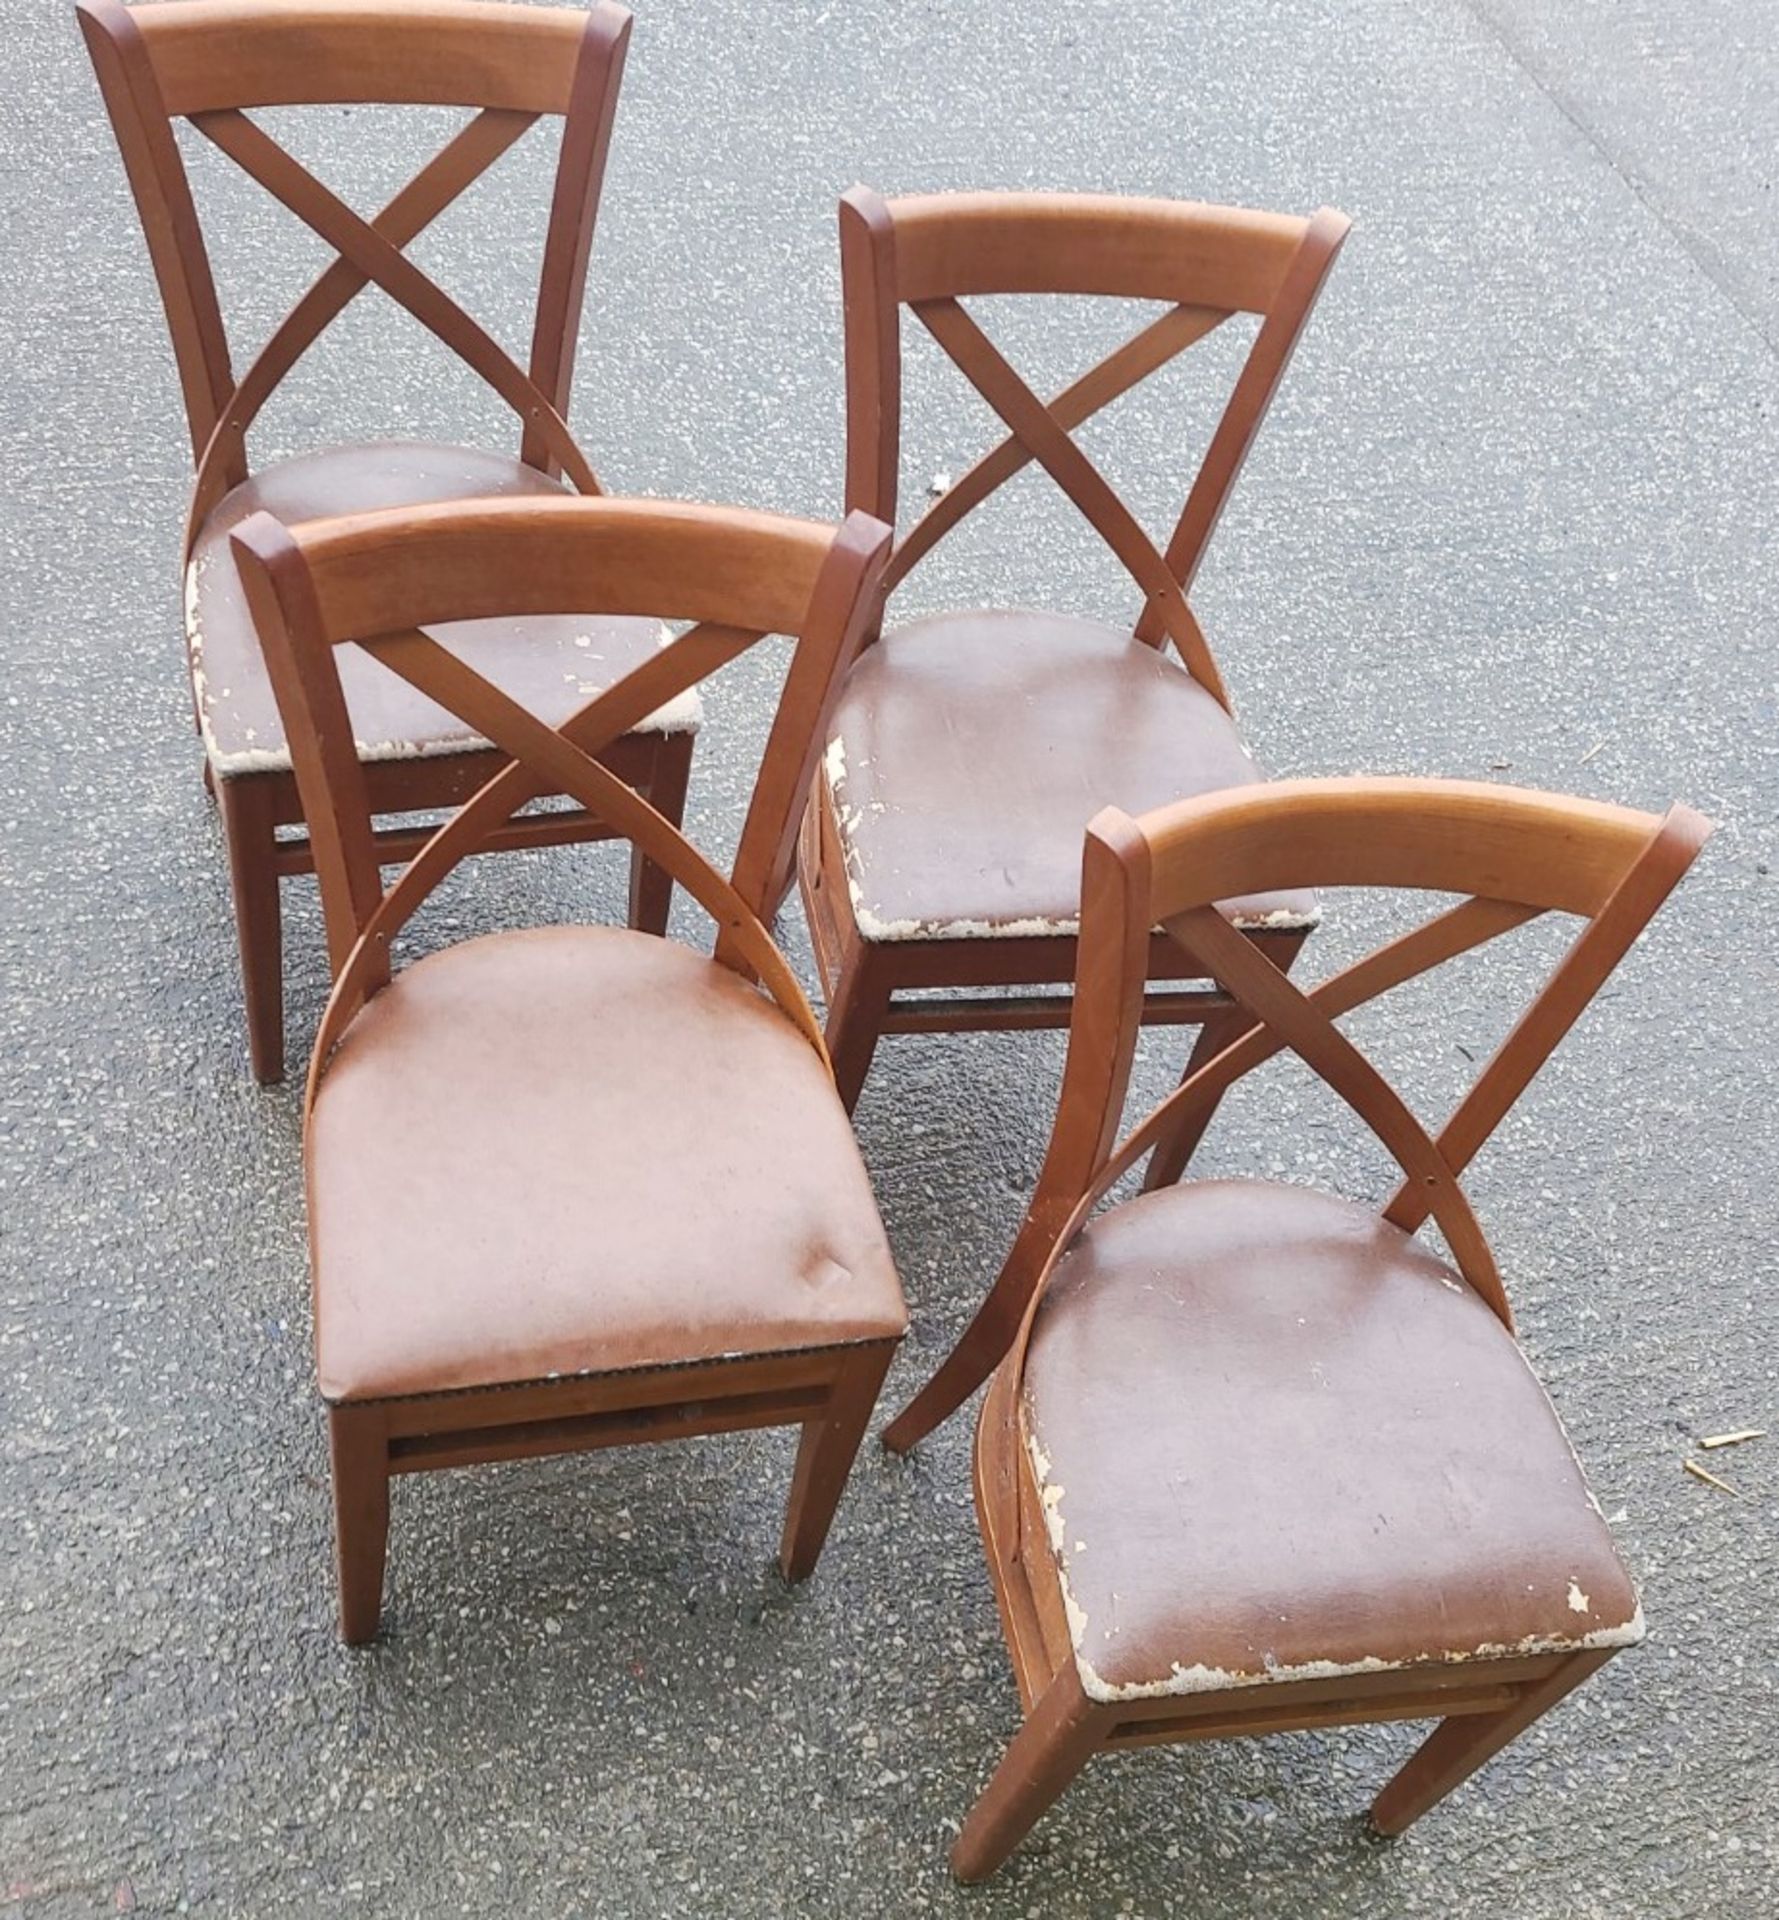 Set Of 4 x 'Leopold' Style Bentwood Side Chair In Walnut Stain & Faux Brown Leather Seat Cushion - Image 4 of 5